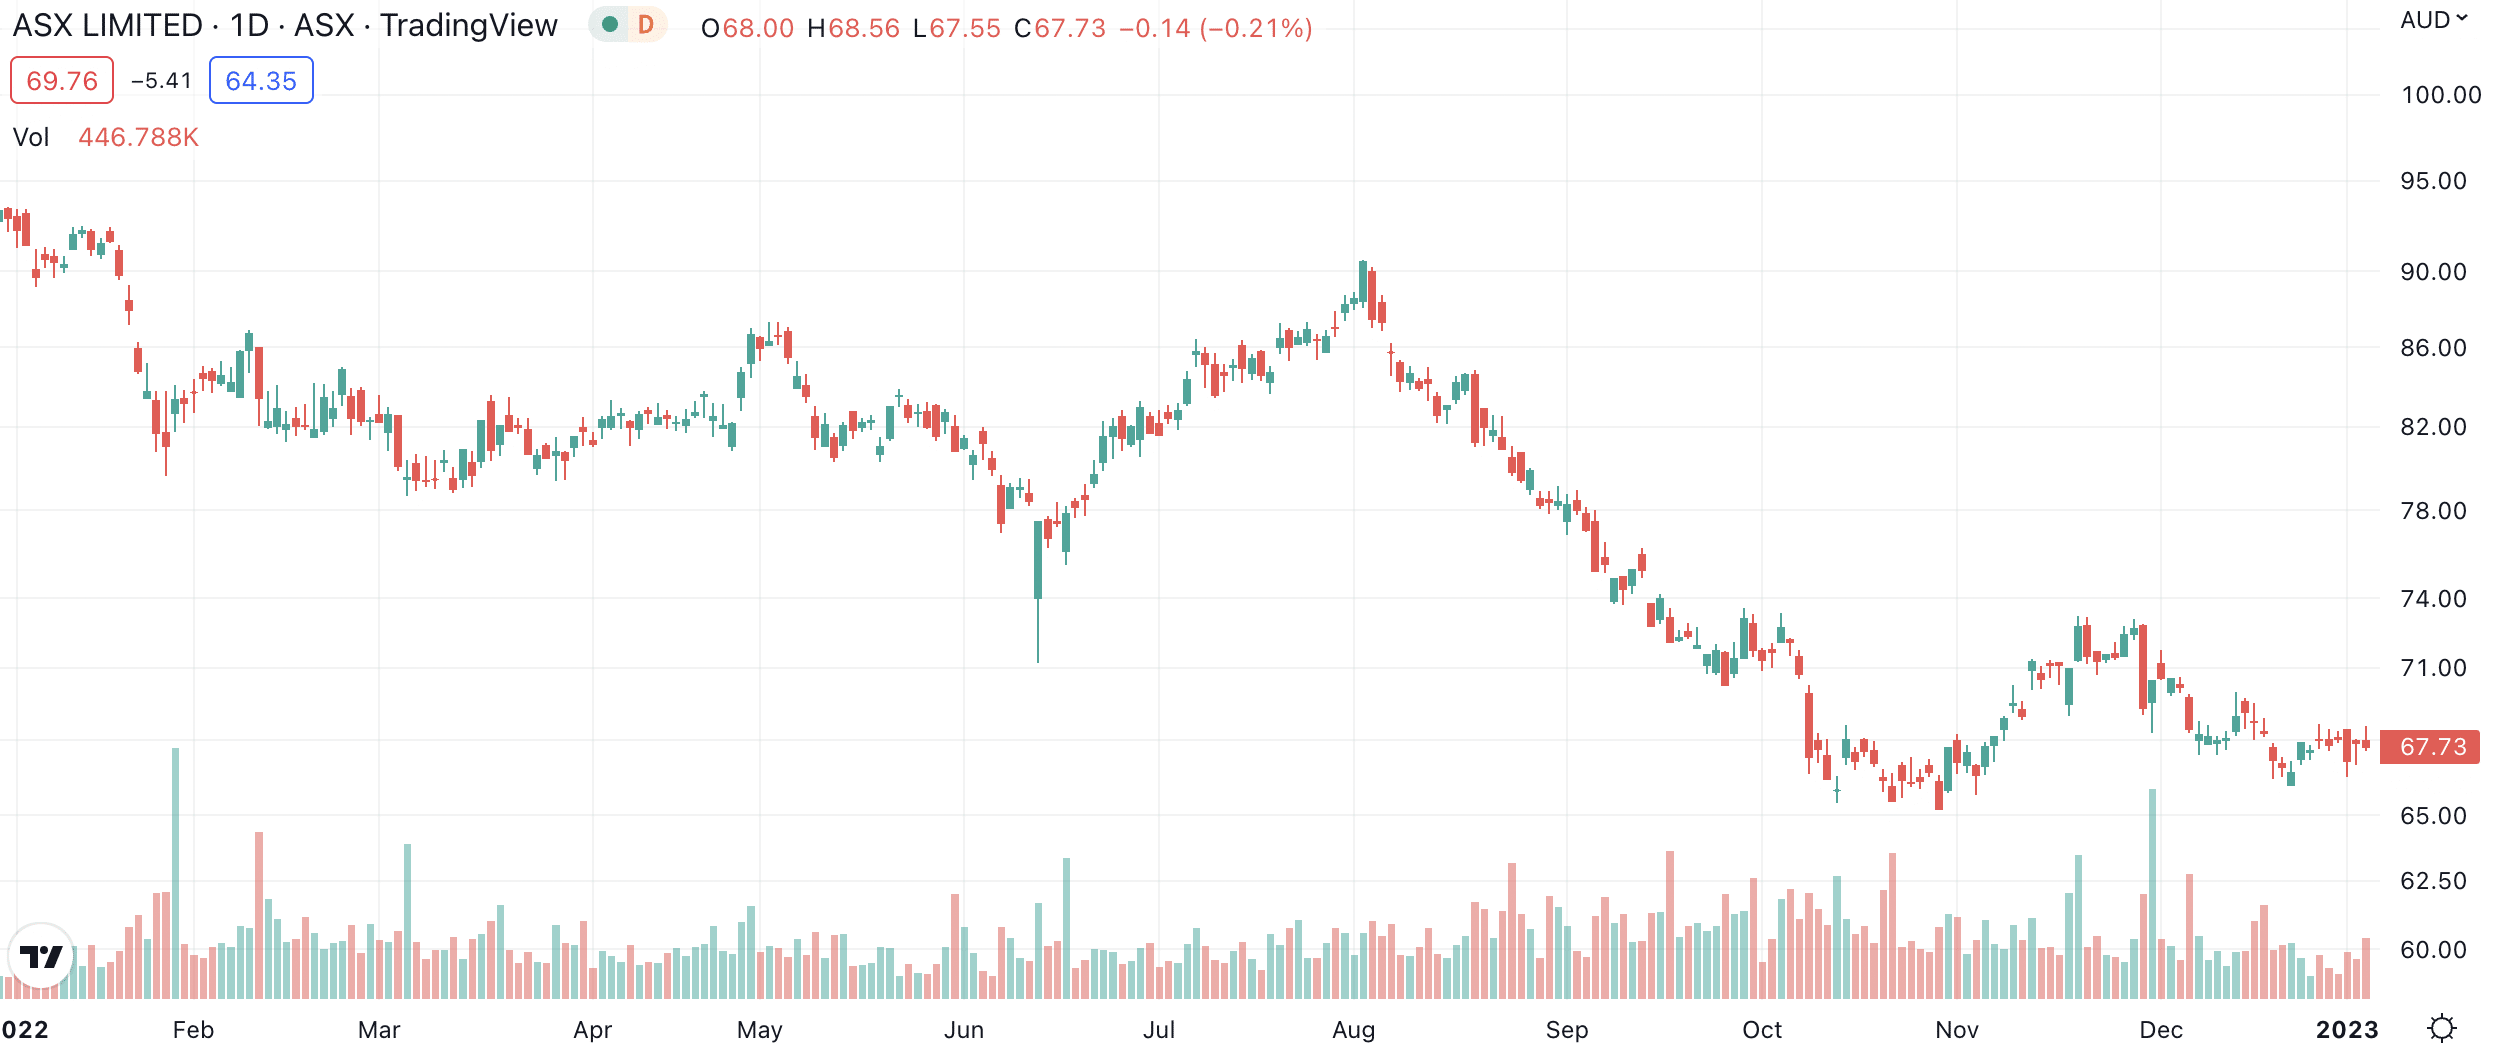 The ASX has had a terrible past 6 months. Is 2023 going to be better? 1